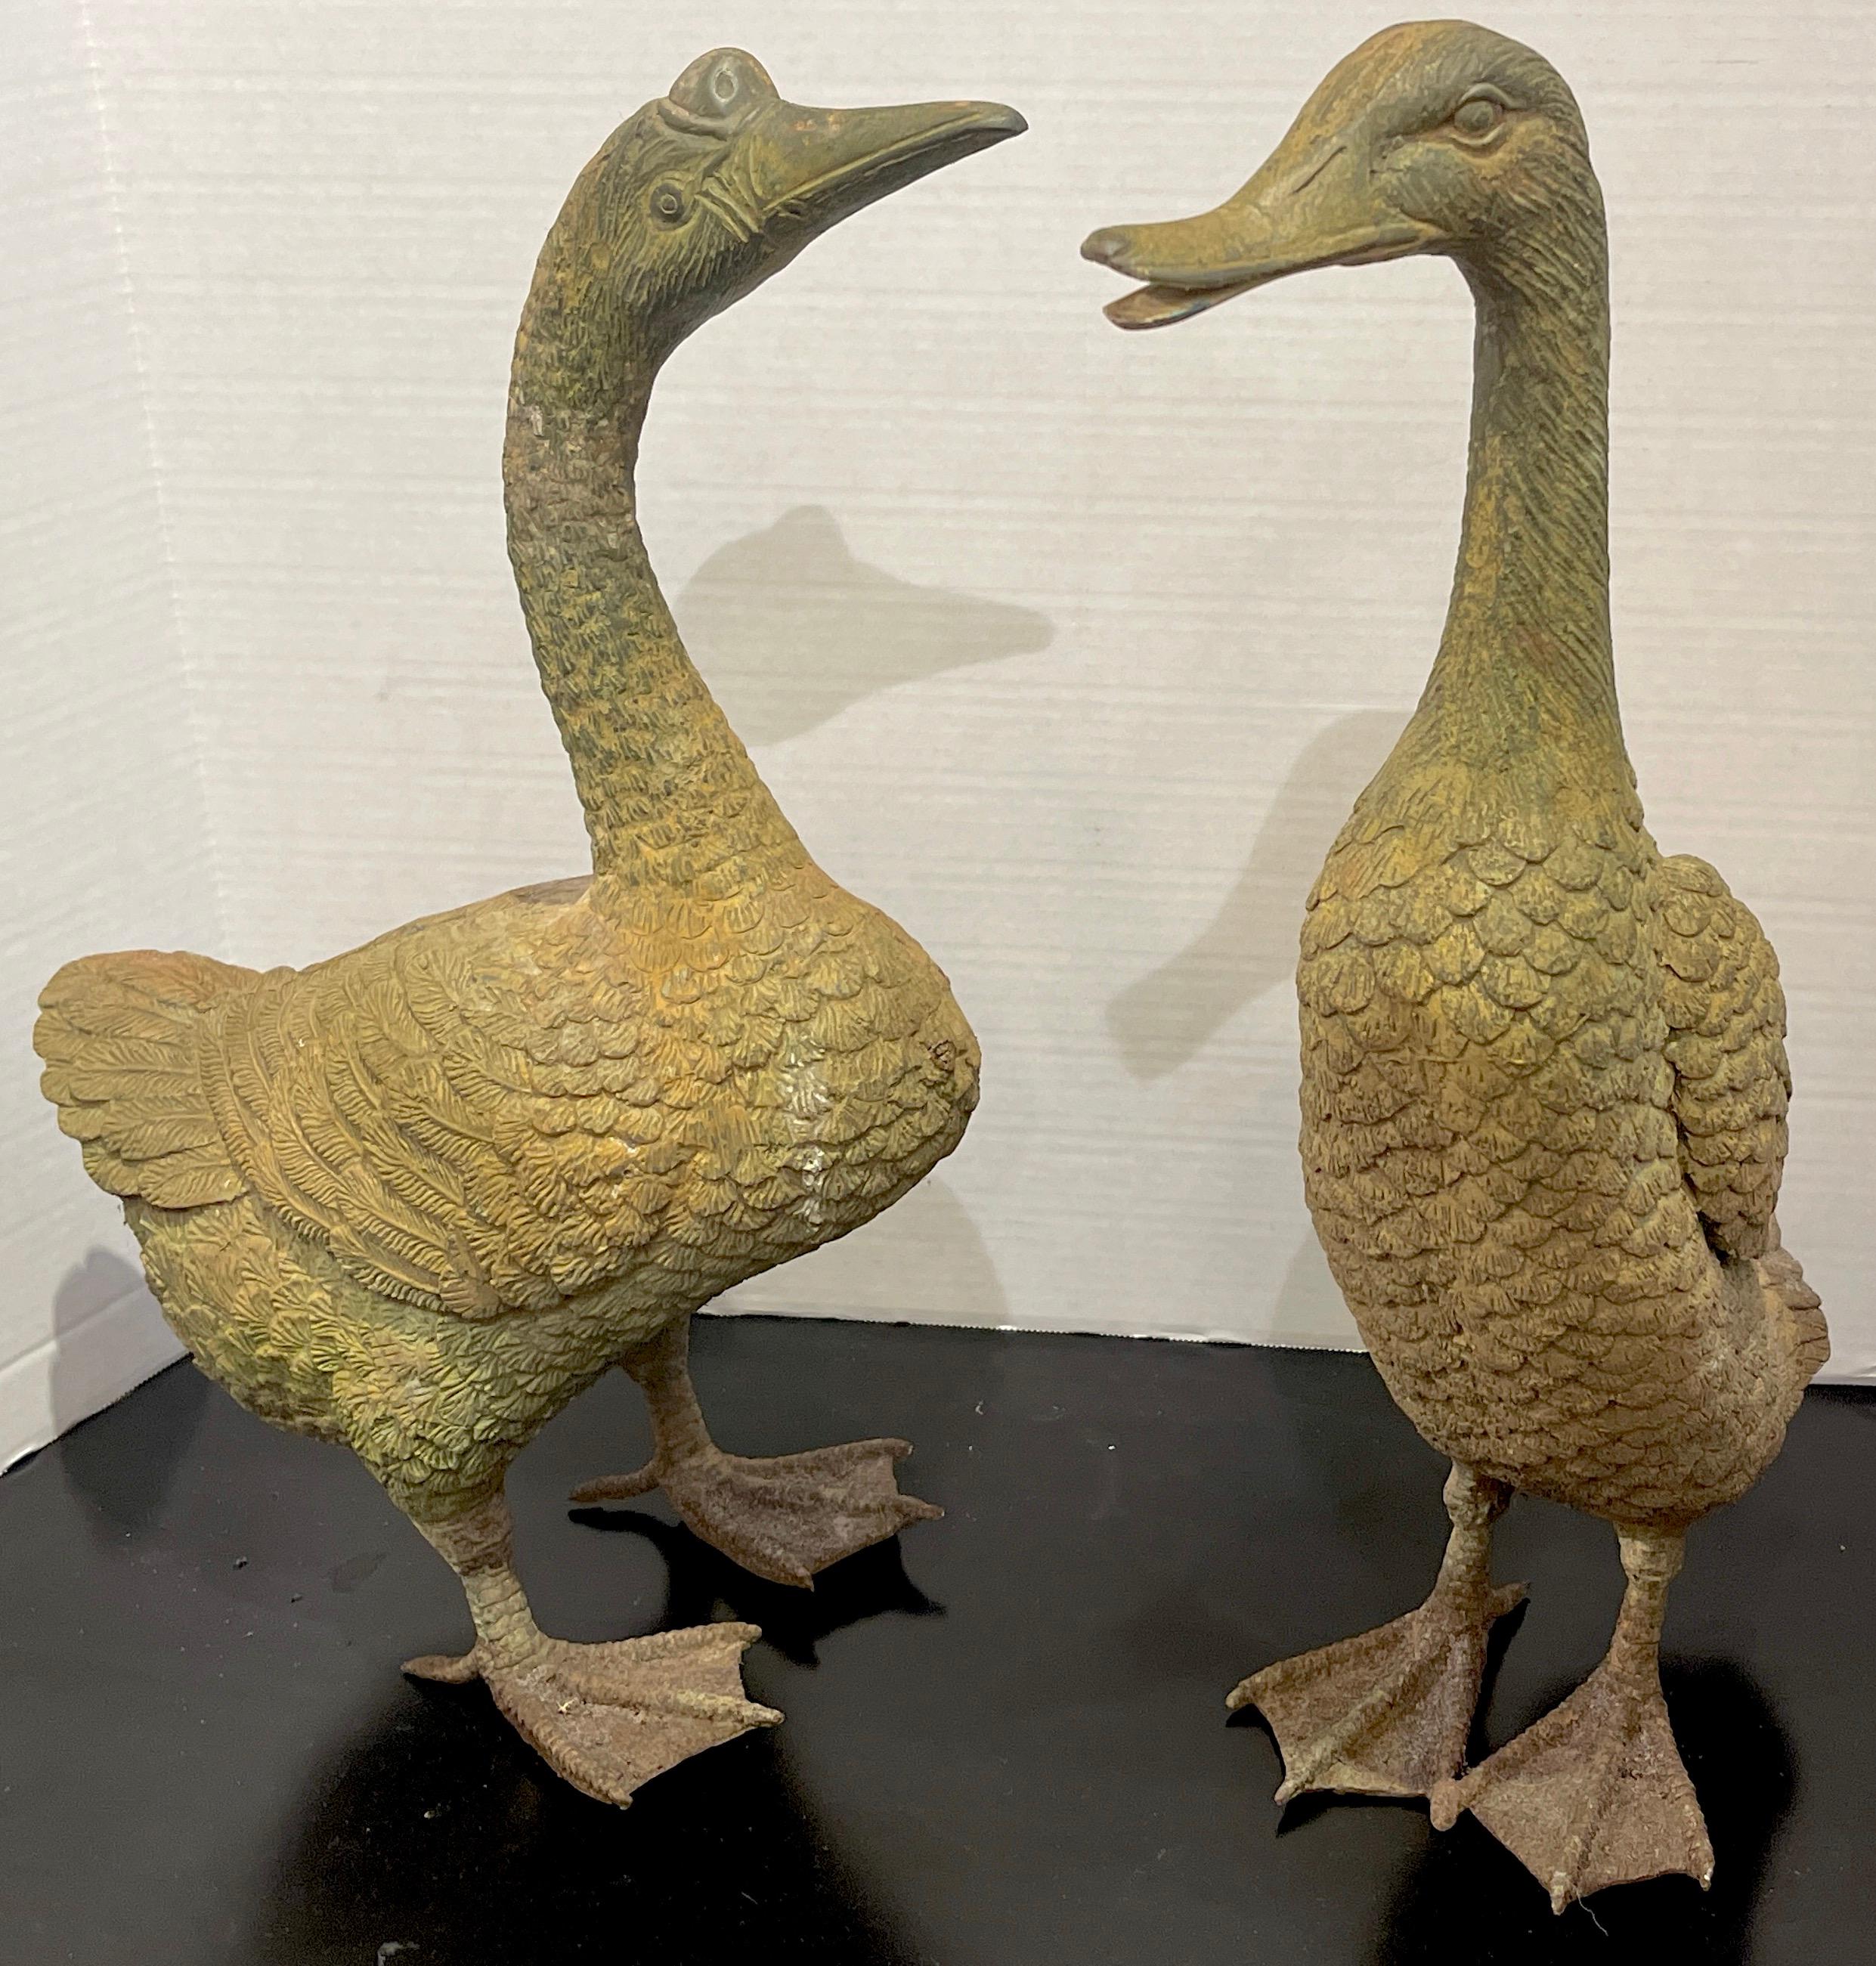 Pair of Chinese Export bronze ducks, Realistically cast and modeled, both with beautiful verdigris patina. One sculpture is slightly taller. Unmarked. Can be used indoors or outdoors 
Measures: Large duck 15